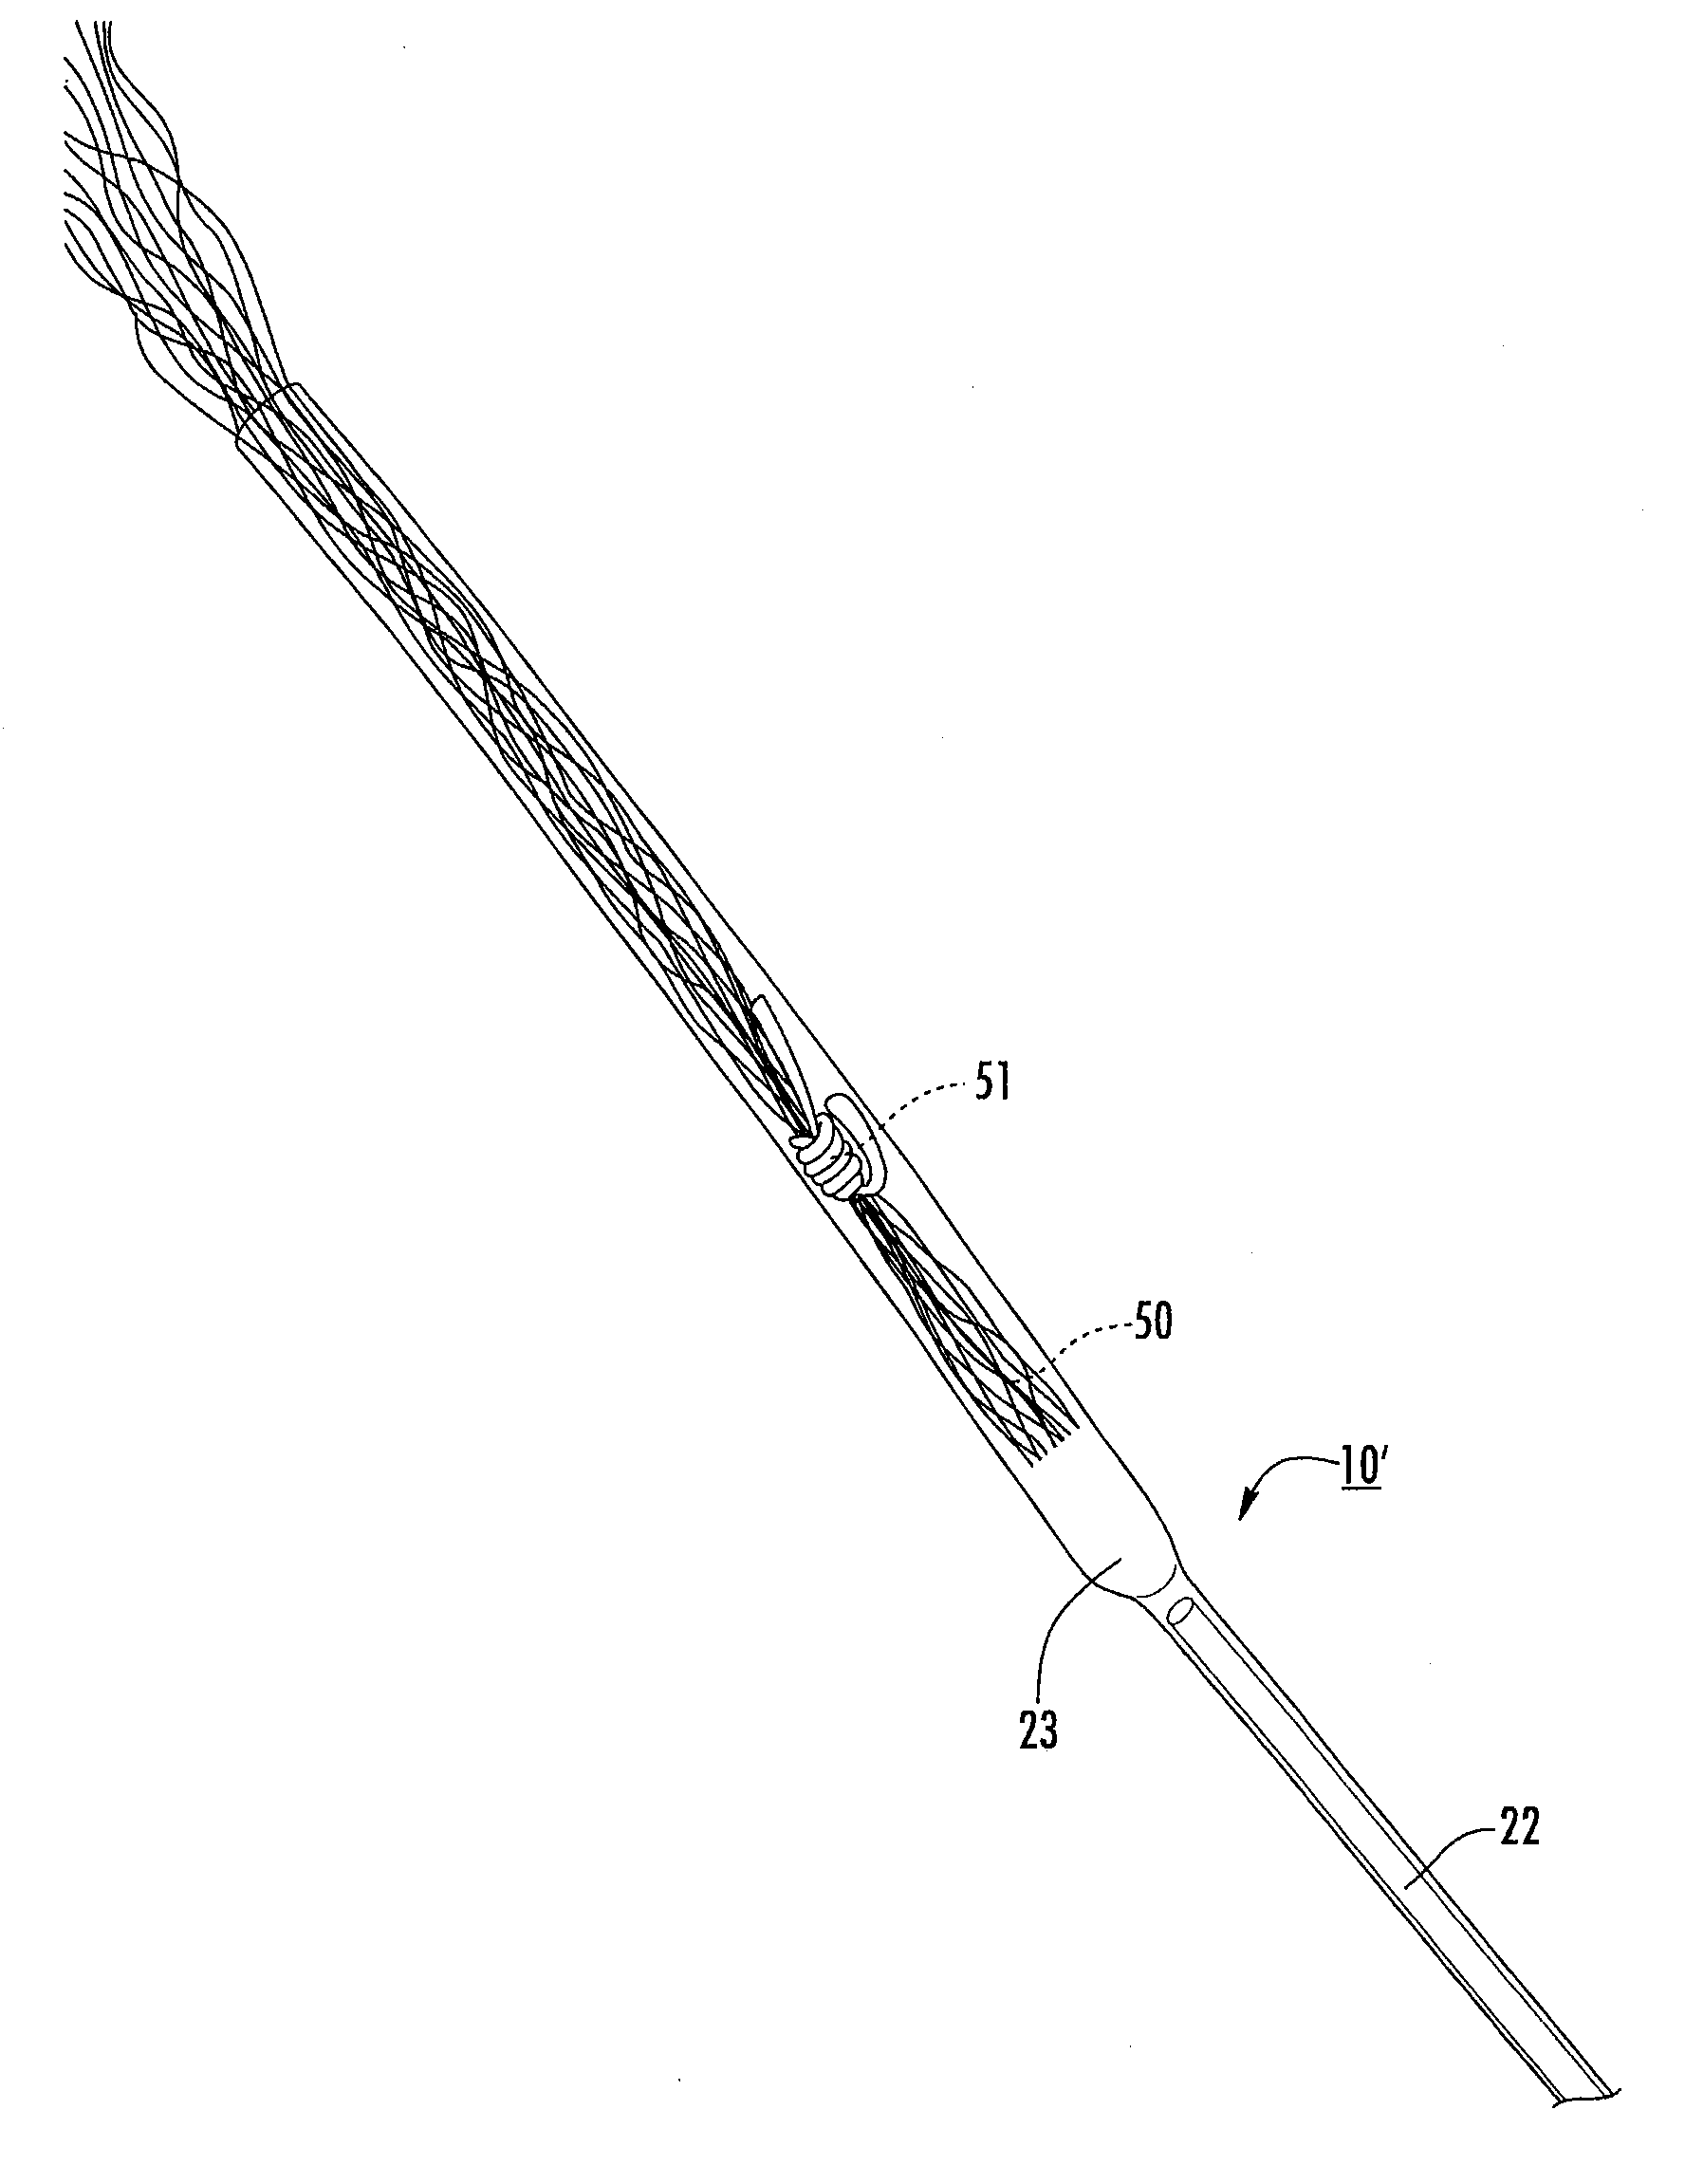 Methods of using compressible tubes for placing implants